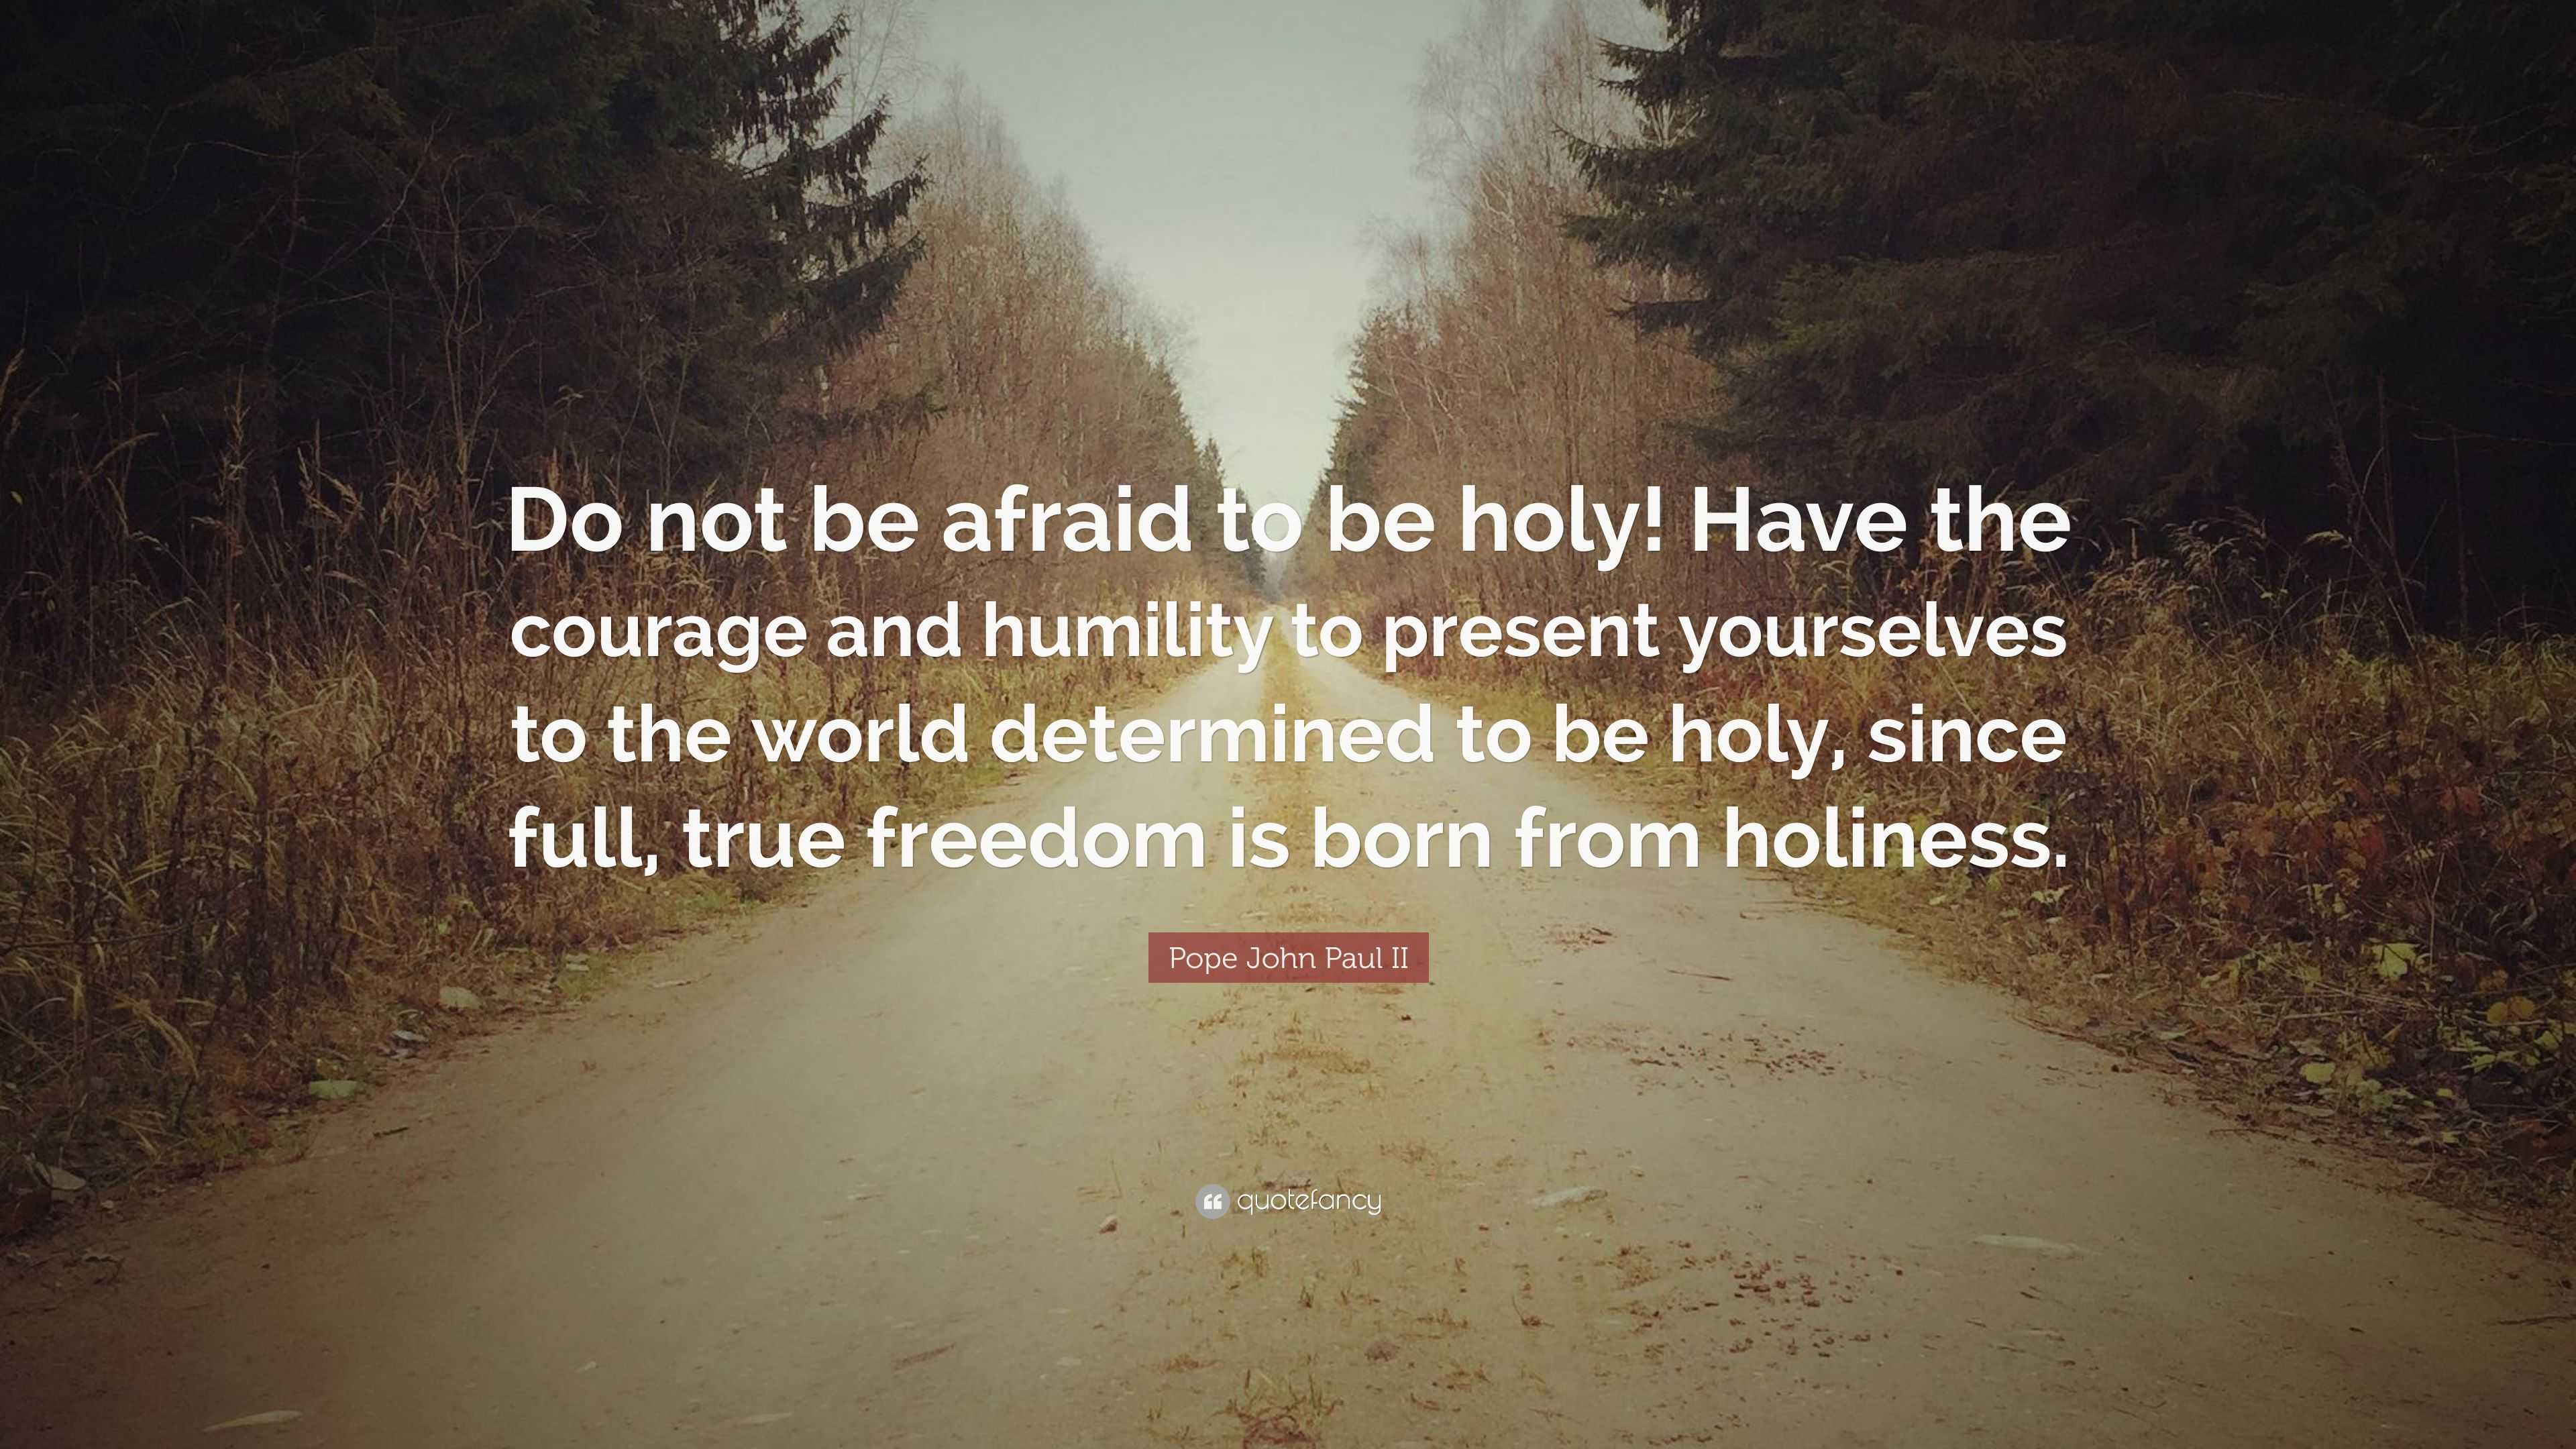 Pope John Paul II Quote: “Do not be afraid to be holy! Have the courage ...